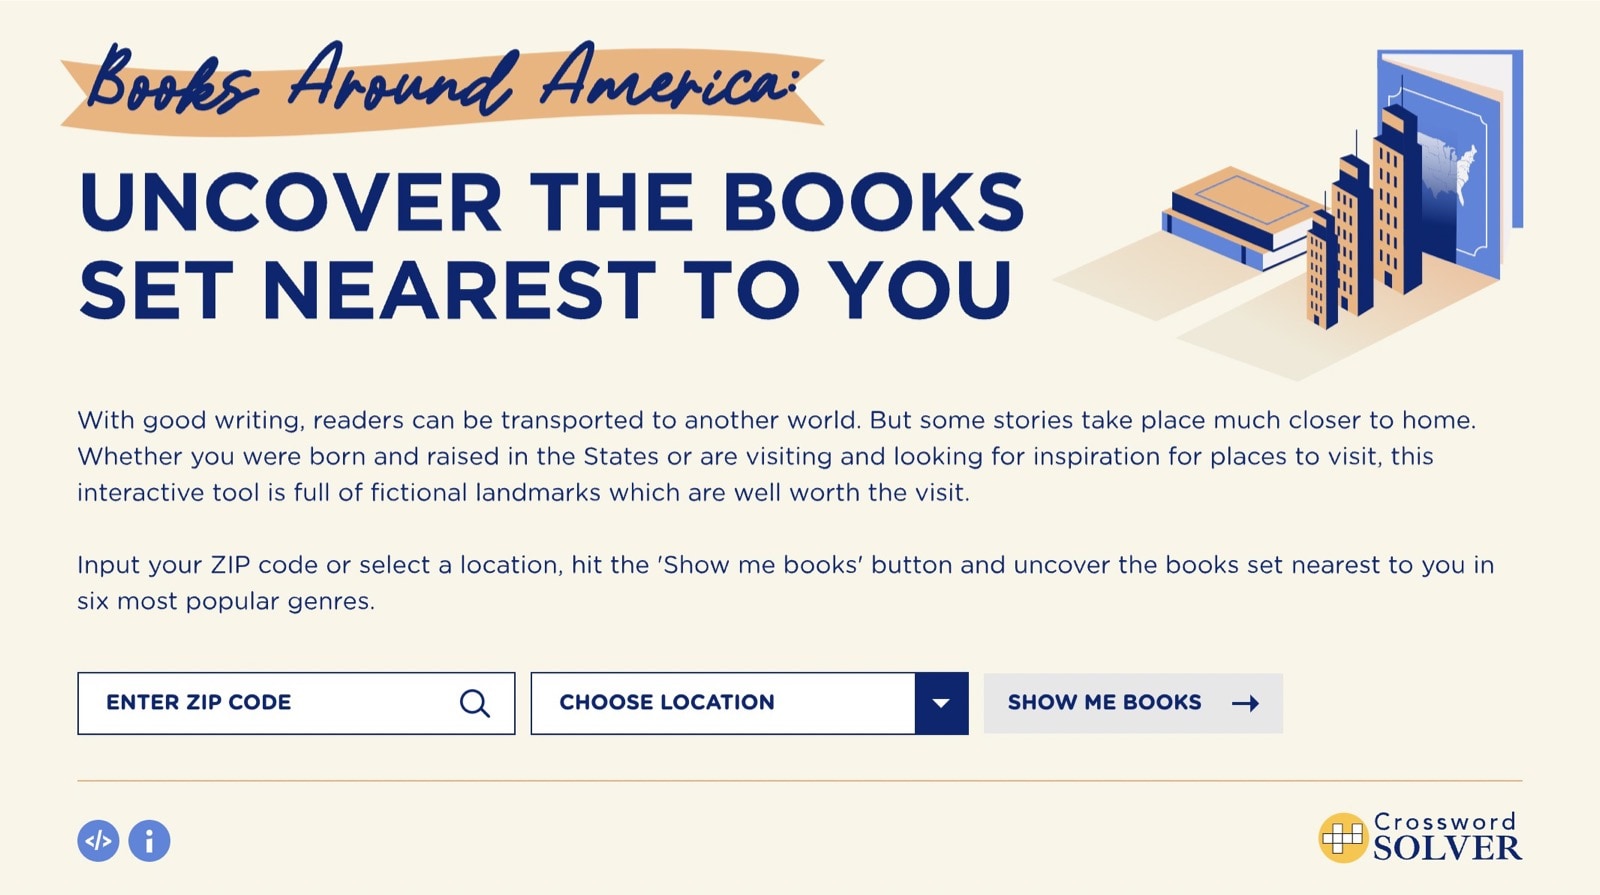 Discover the books set nearest to you interactive tool